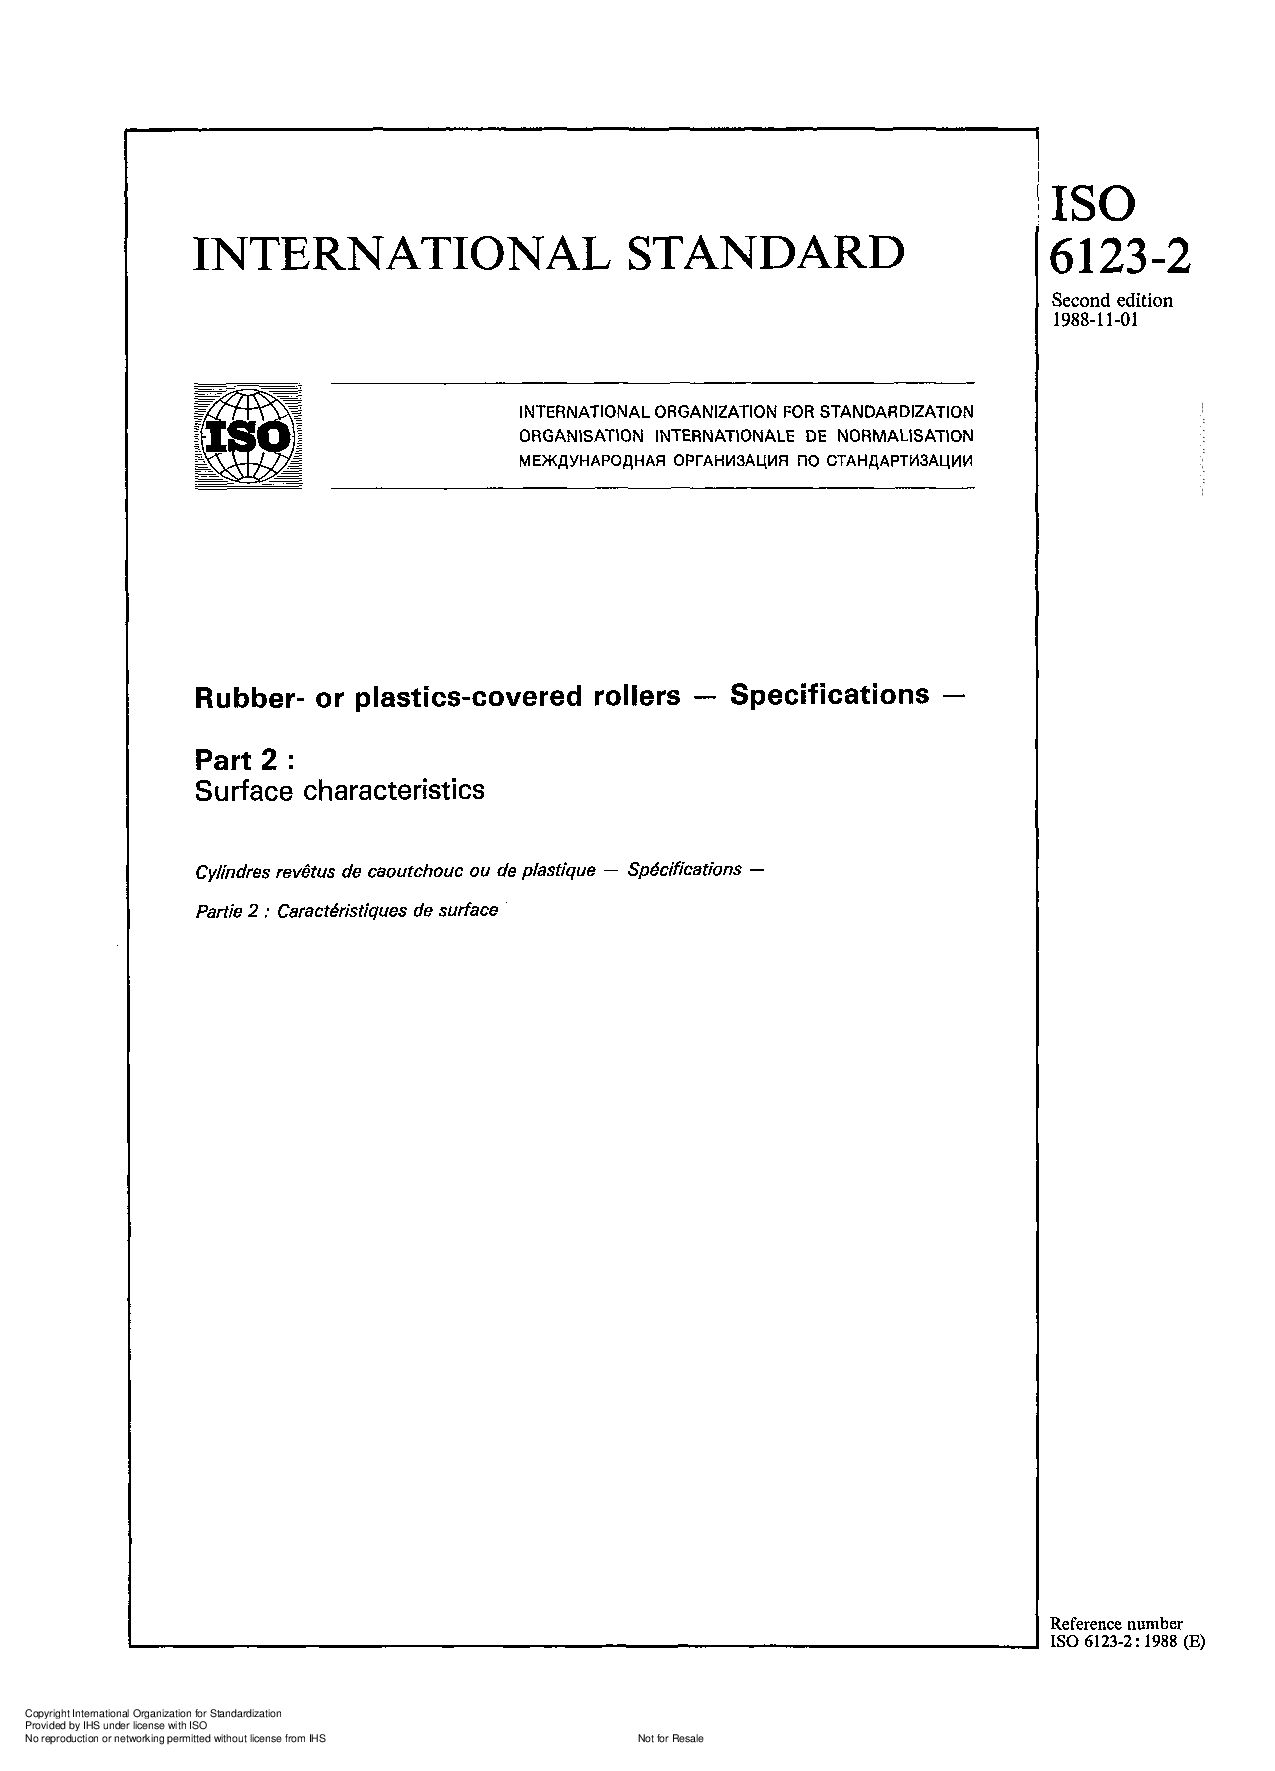 ISO 6123-2:1988